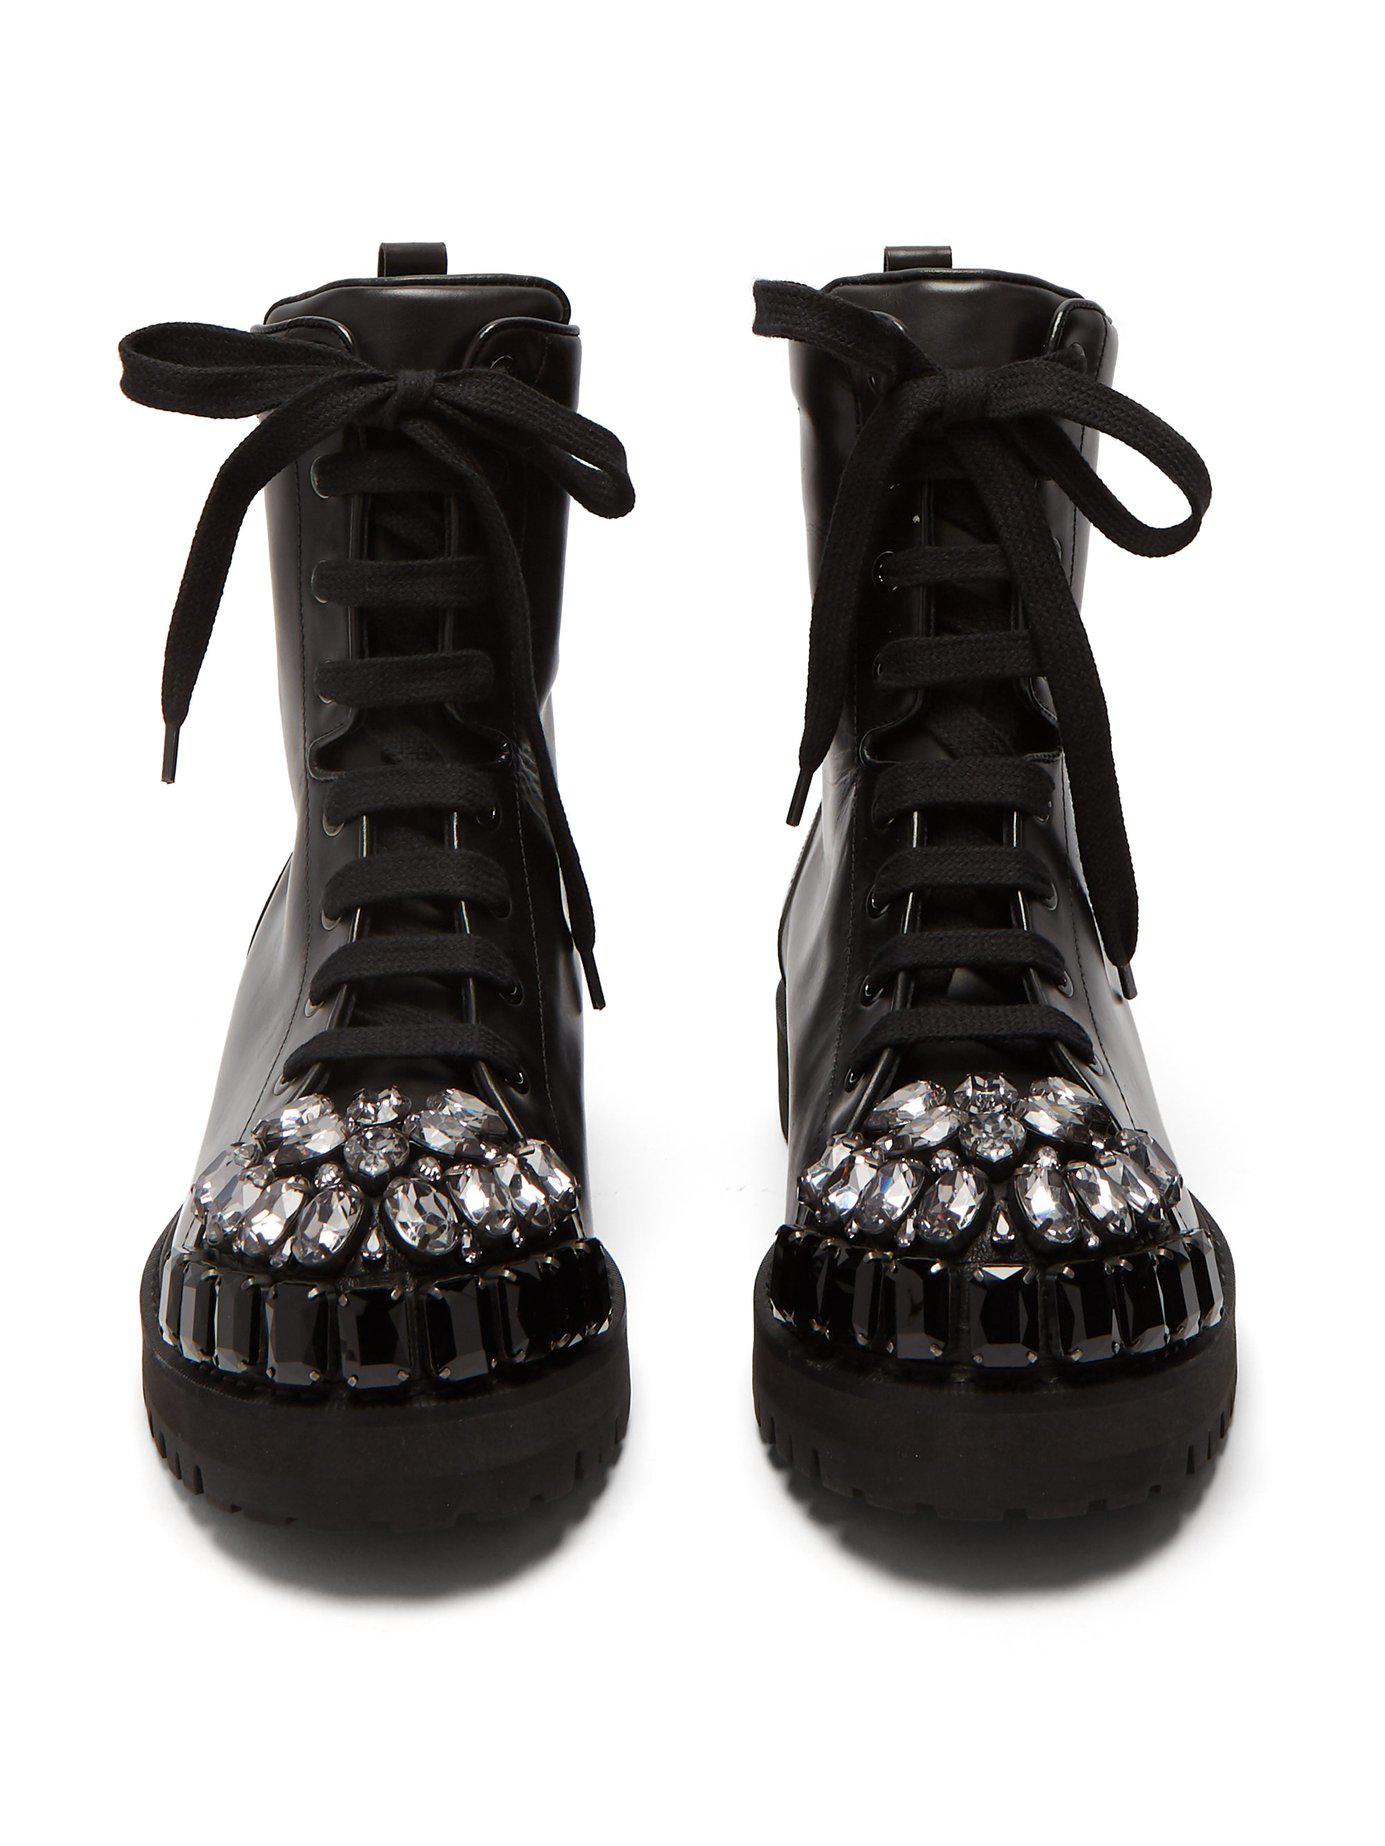 Rochas Embellished Leather Combat Boots in Black - Lyst